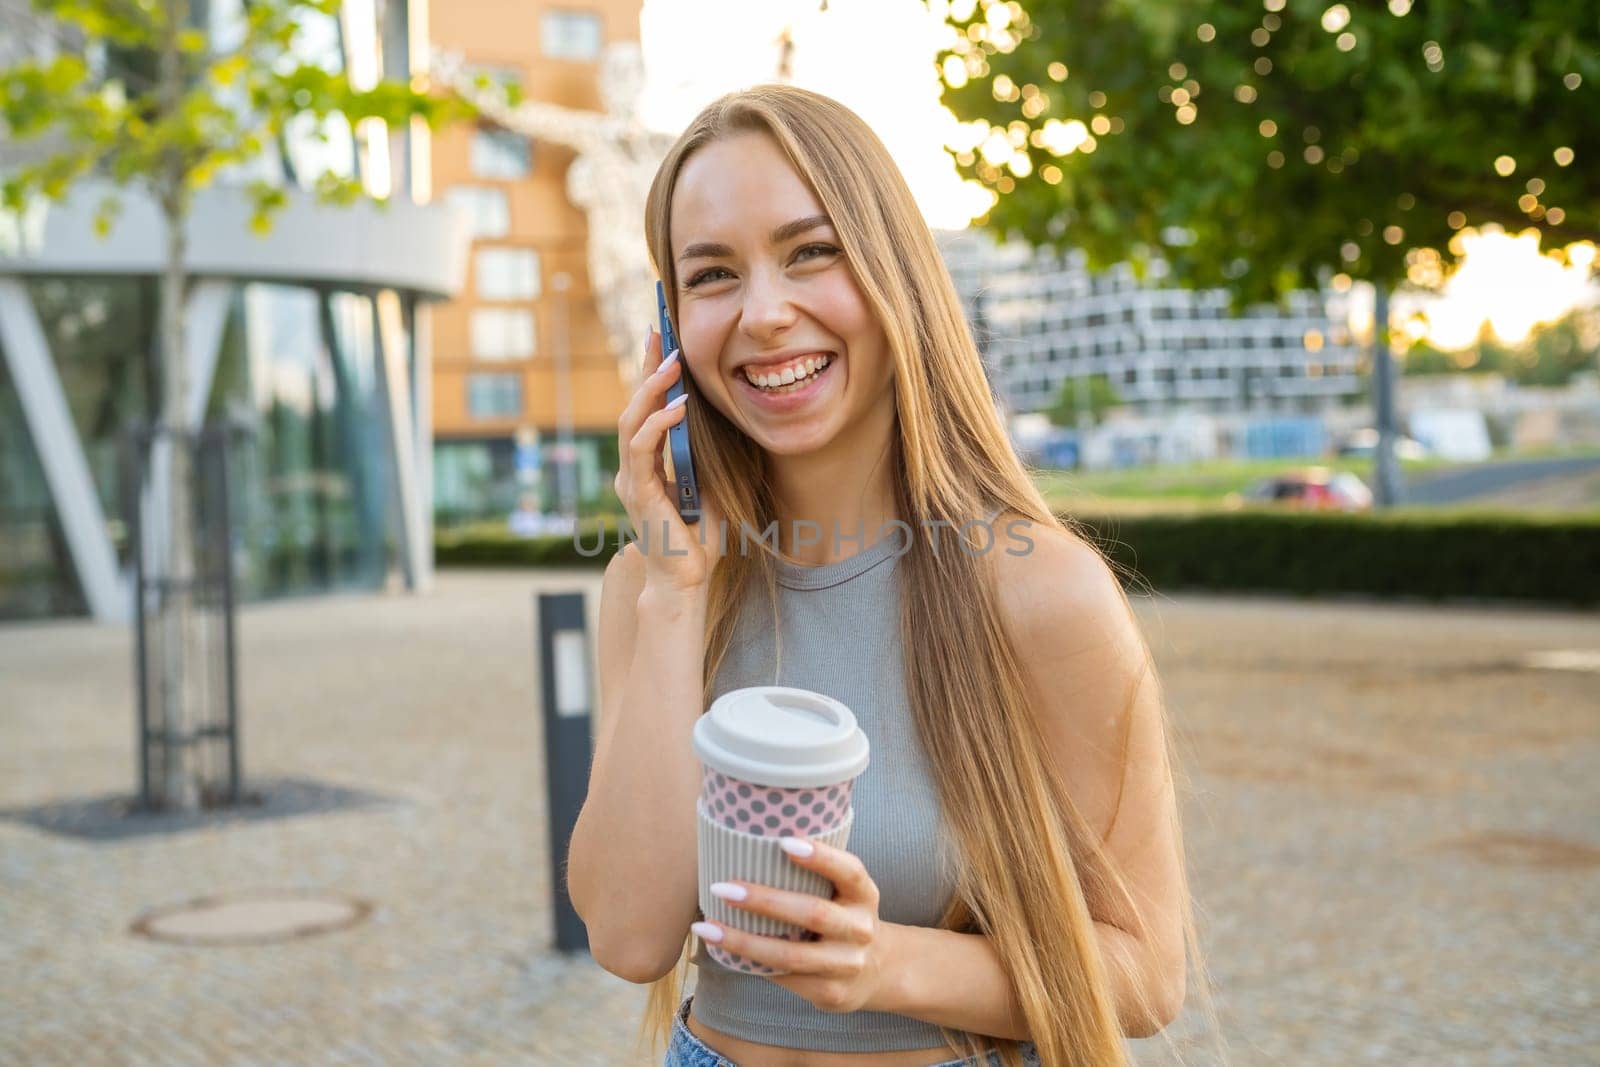 Happy woman talking on phone and smiling at the camera.